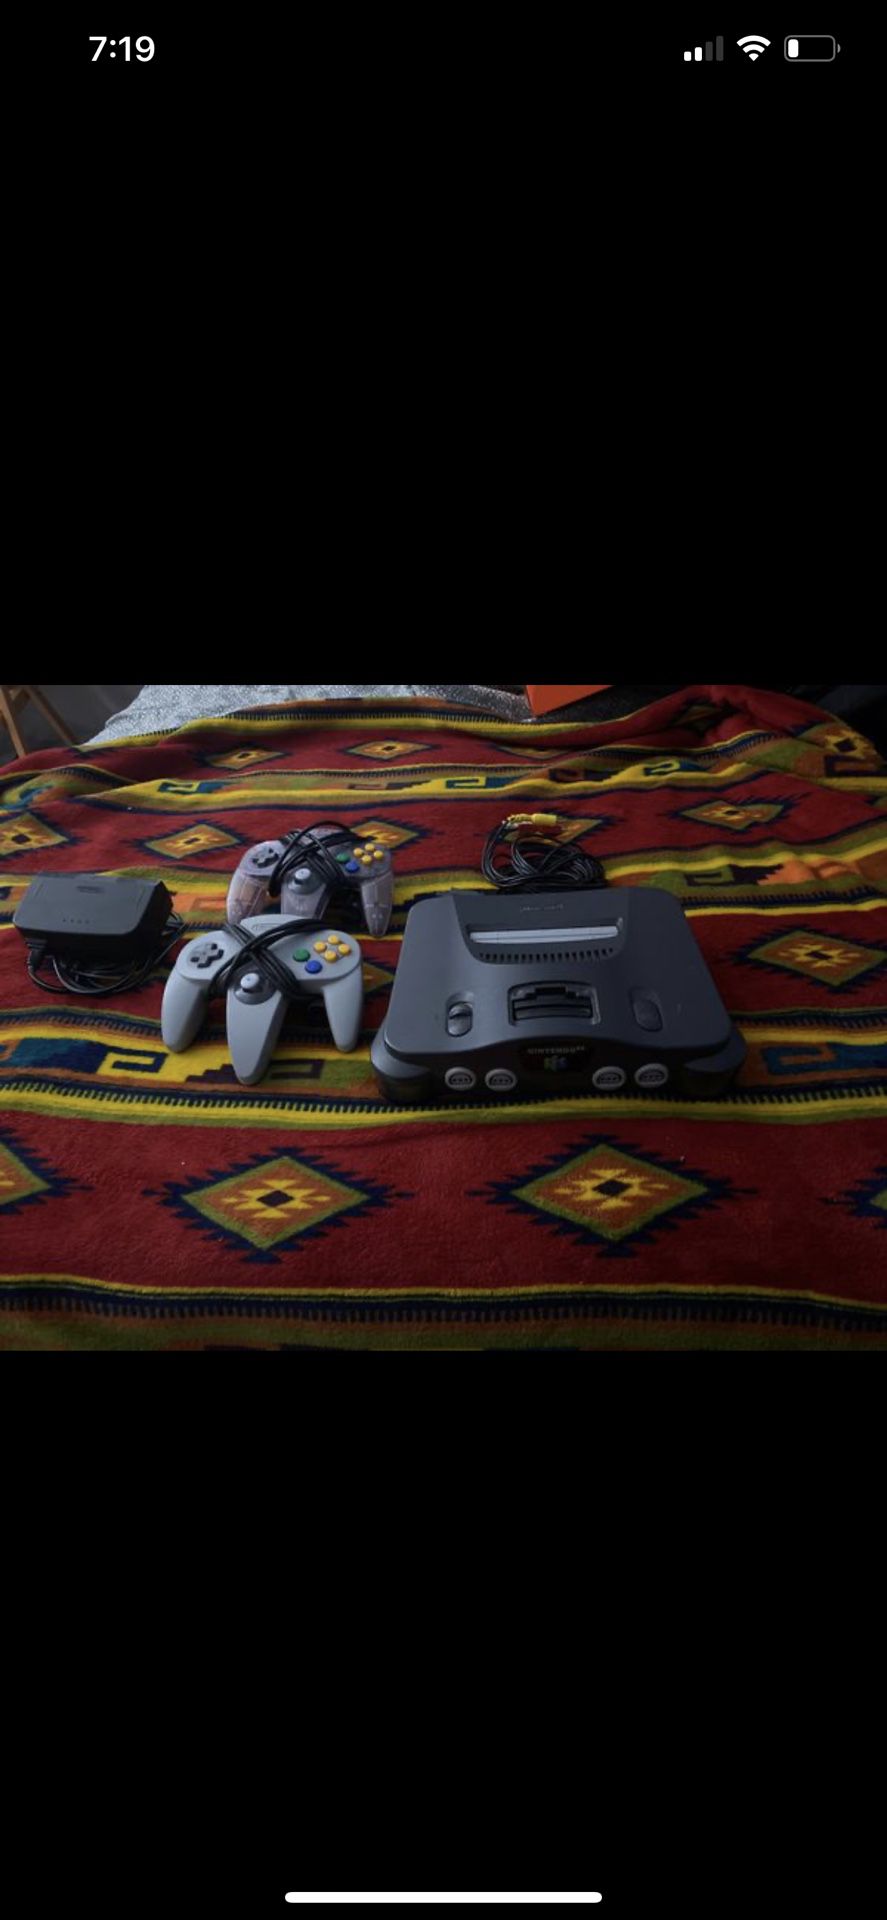 Nintendo 64 console w/ controllers